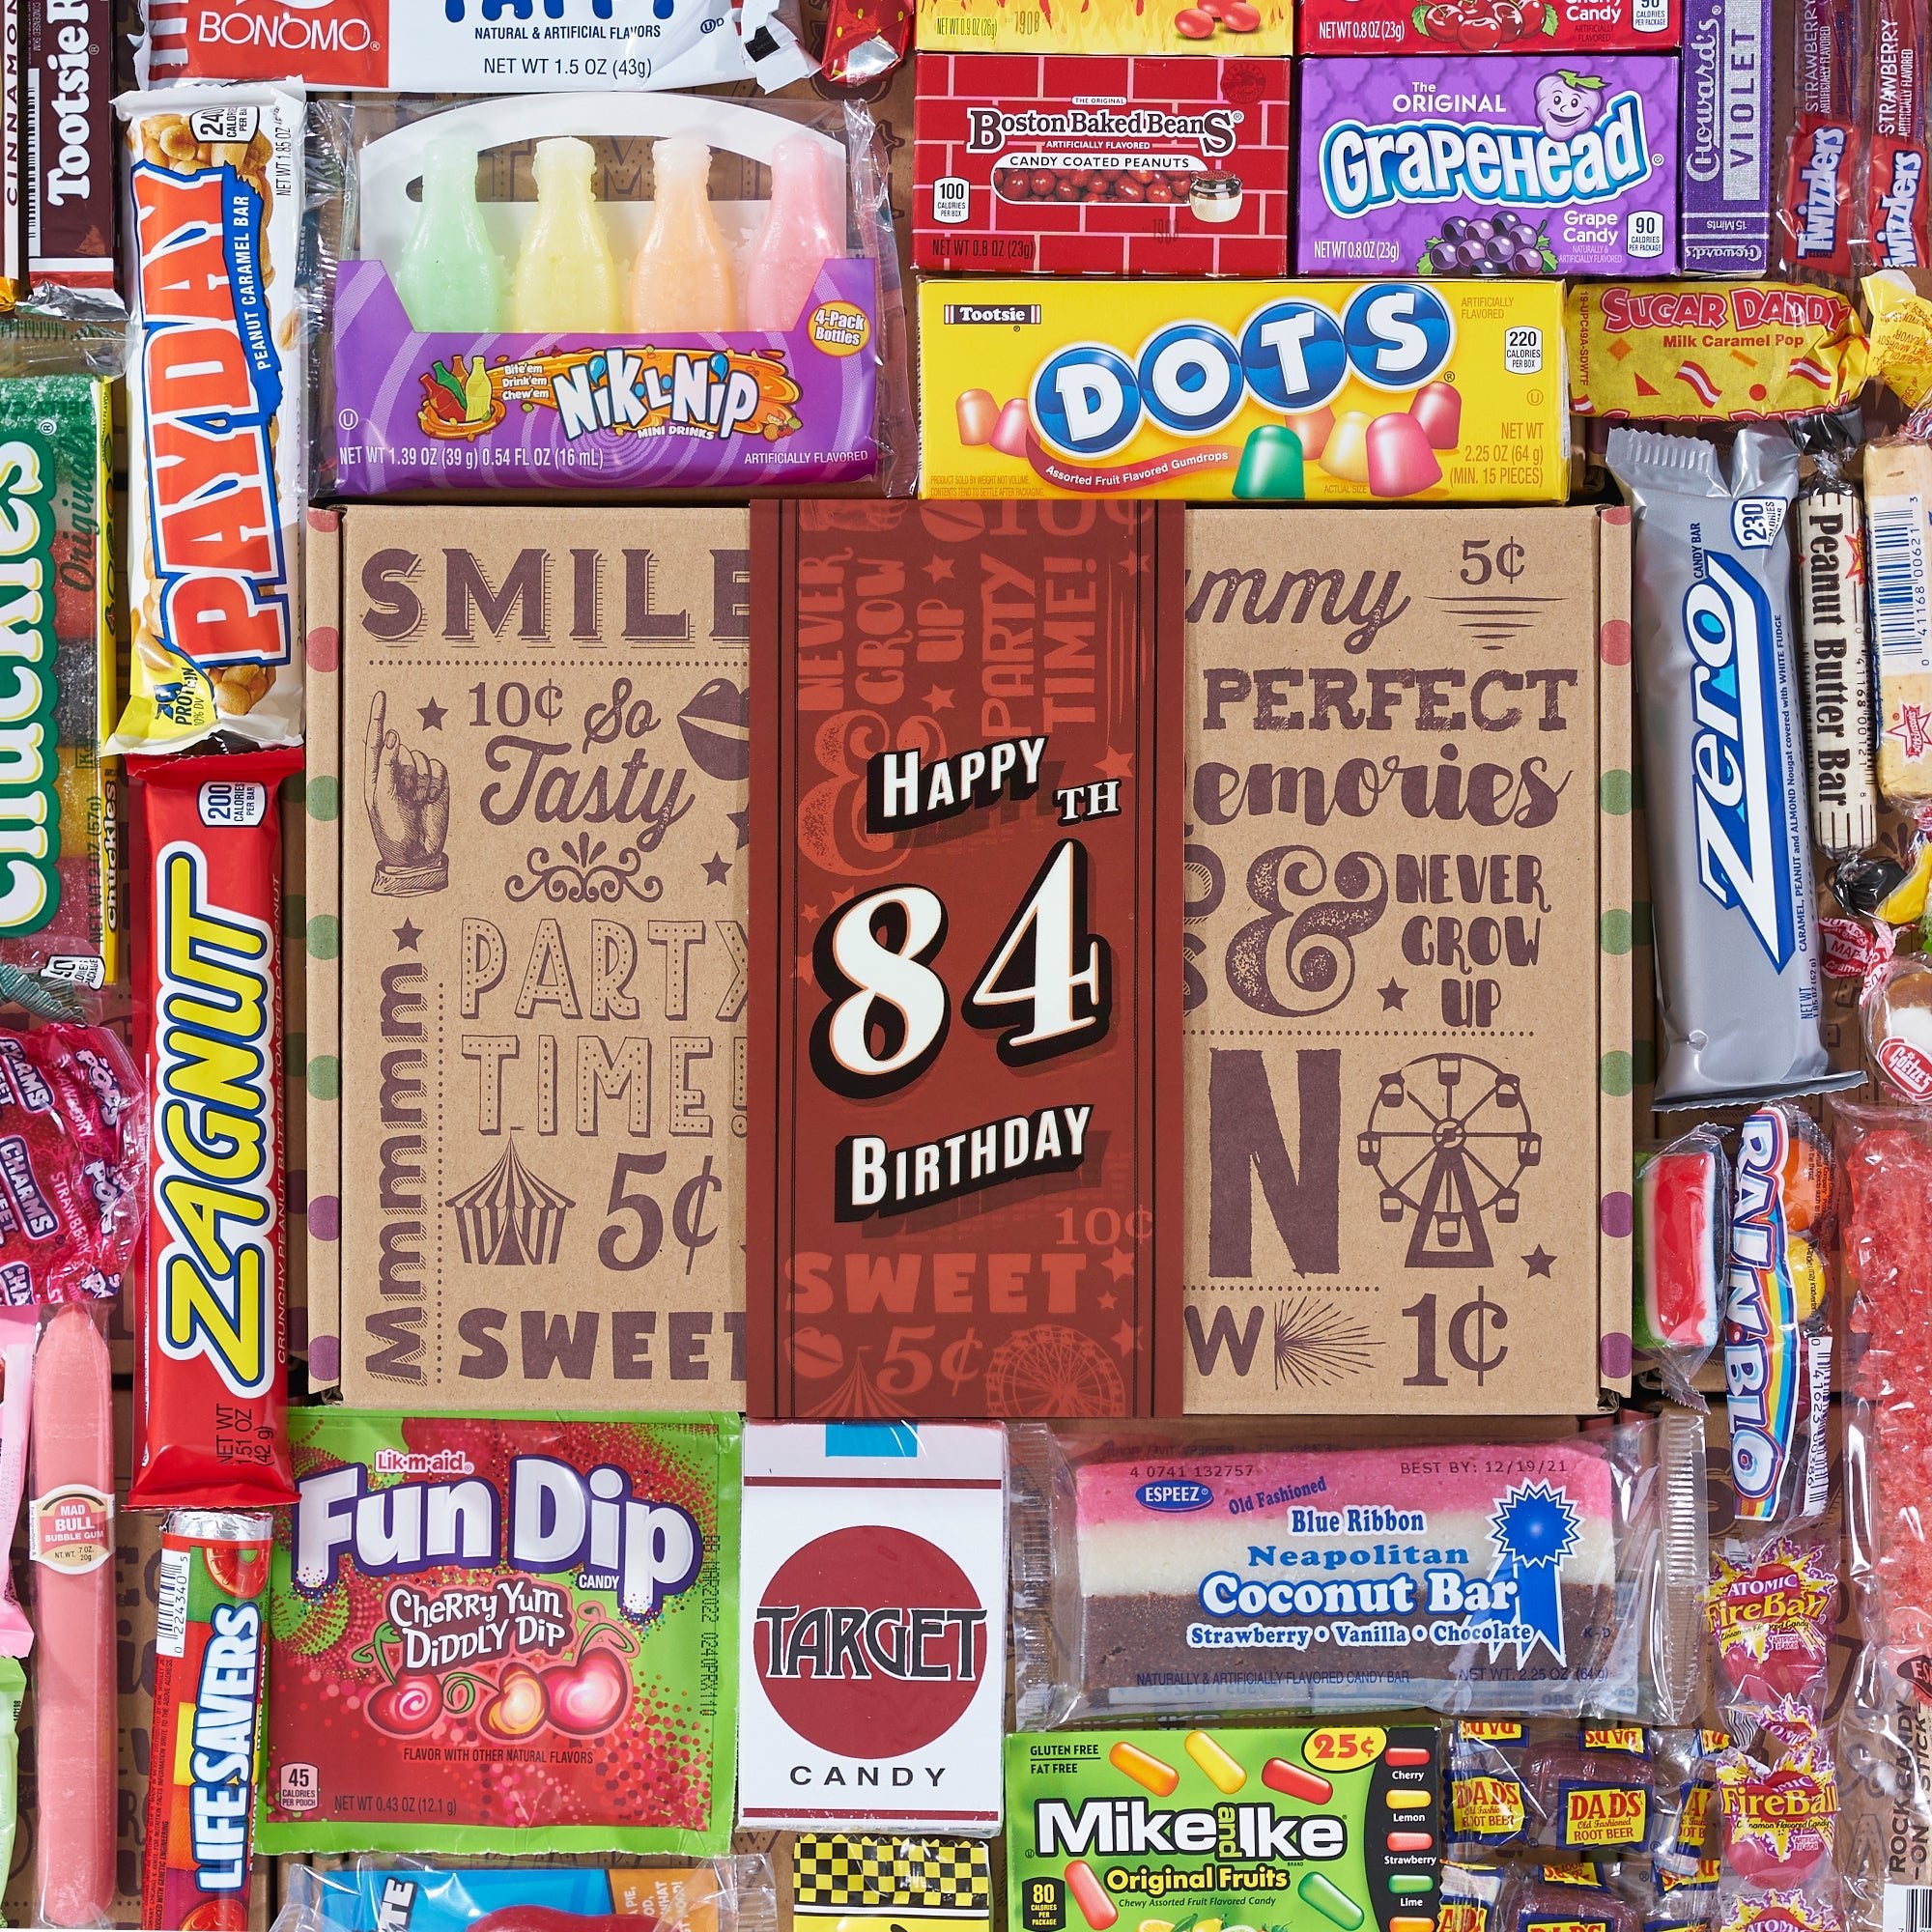 84th Birthday Retro Candy Gift - Vintage Candy Co.